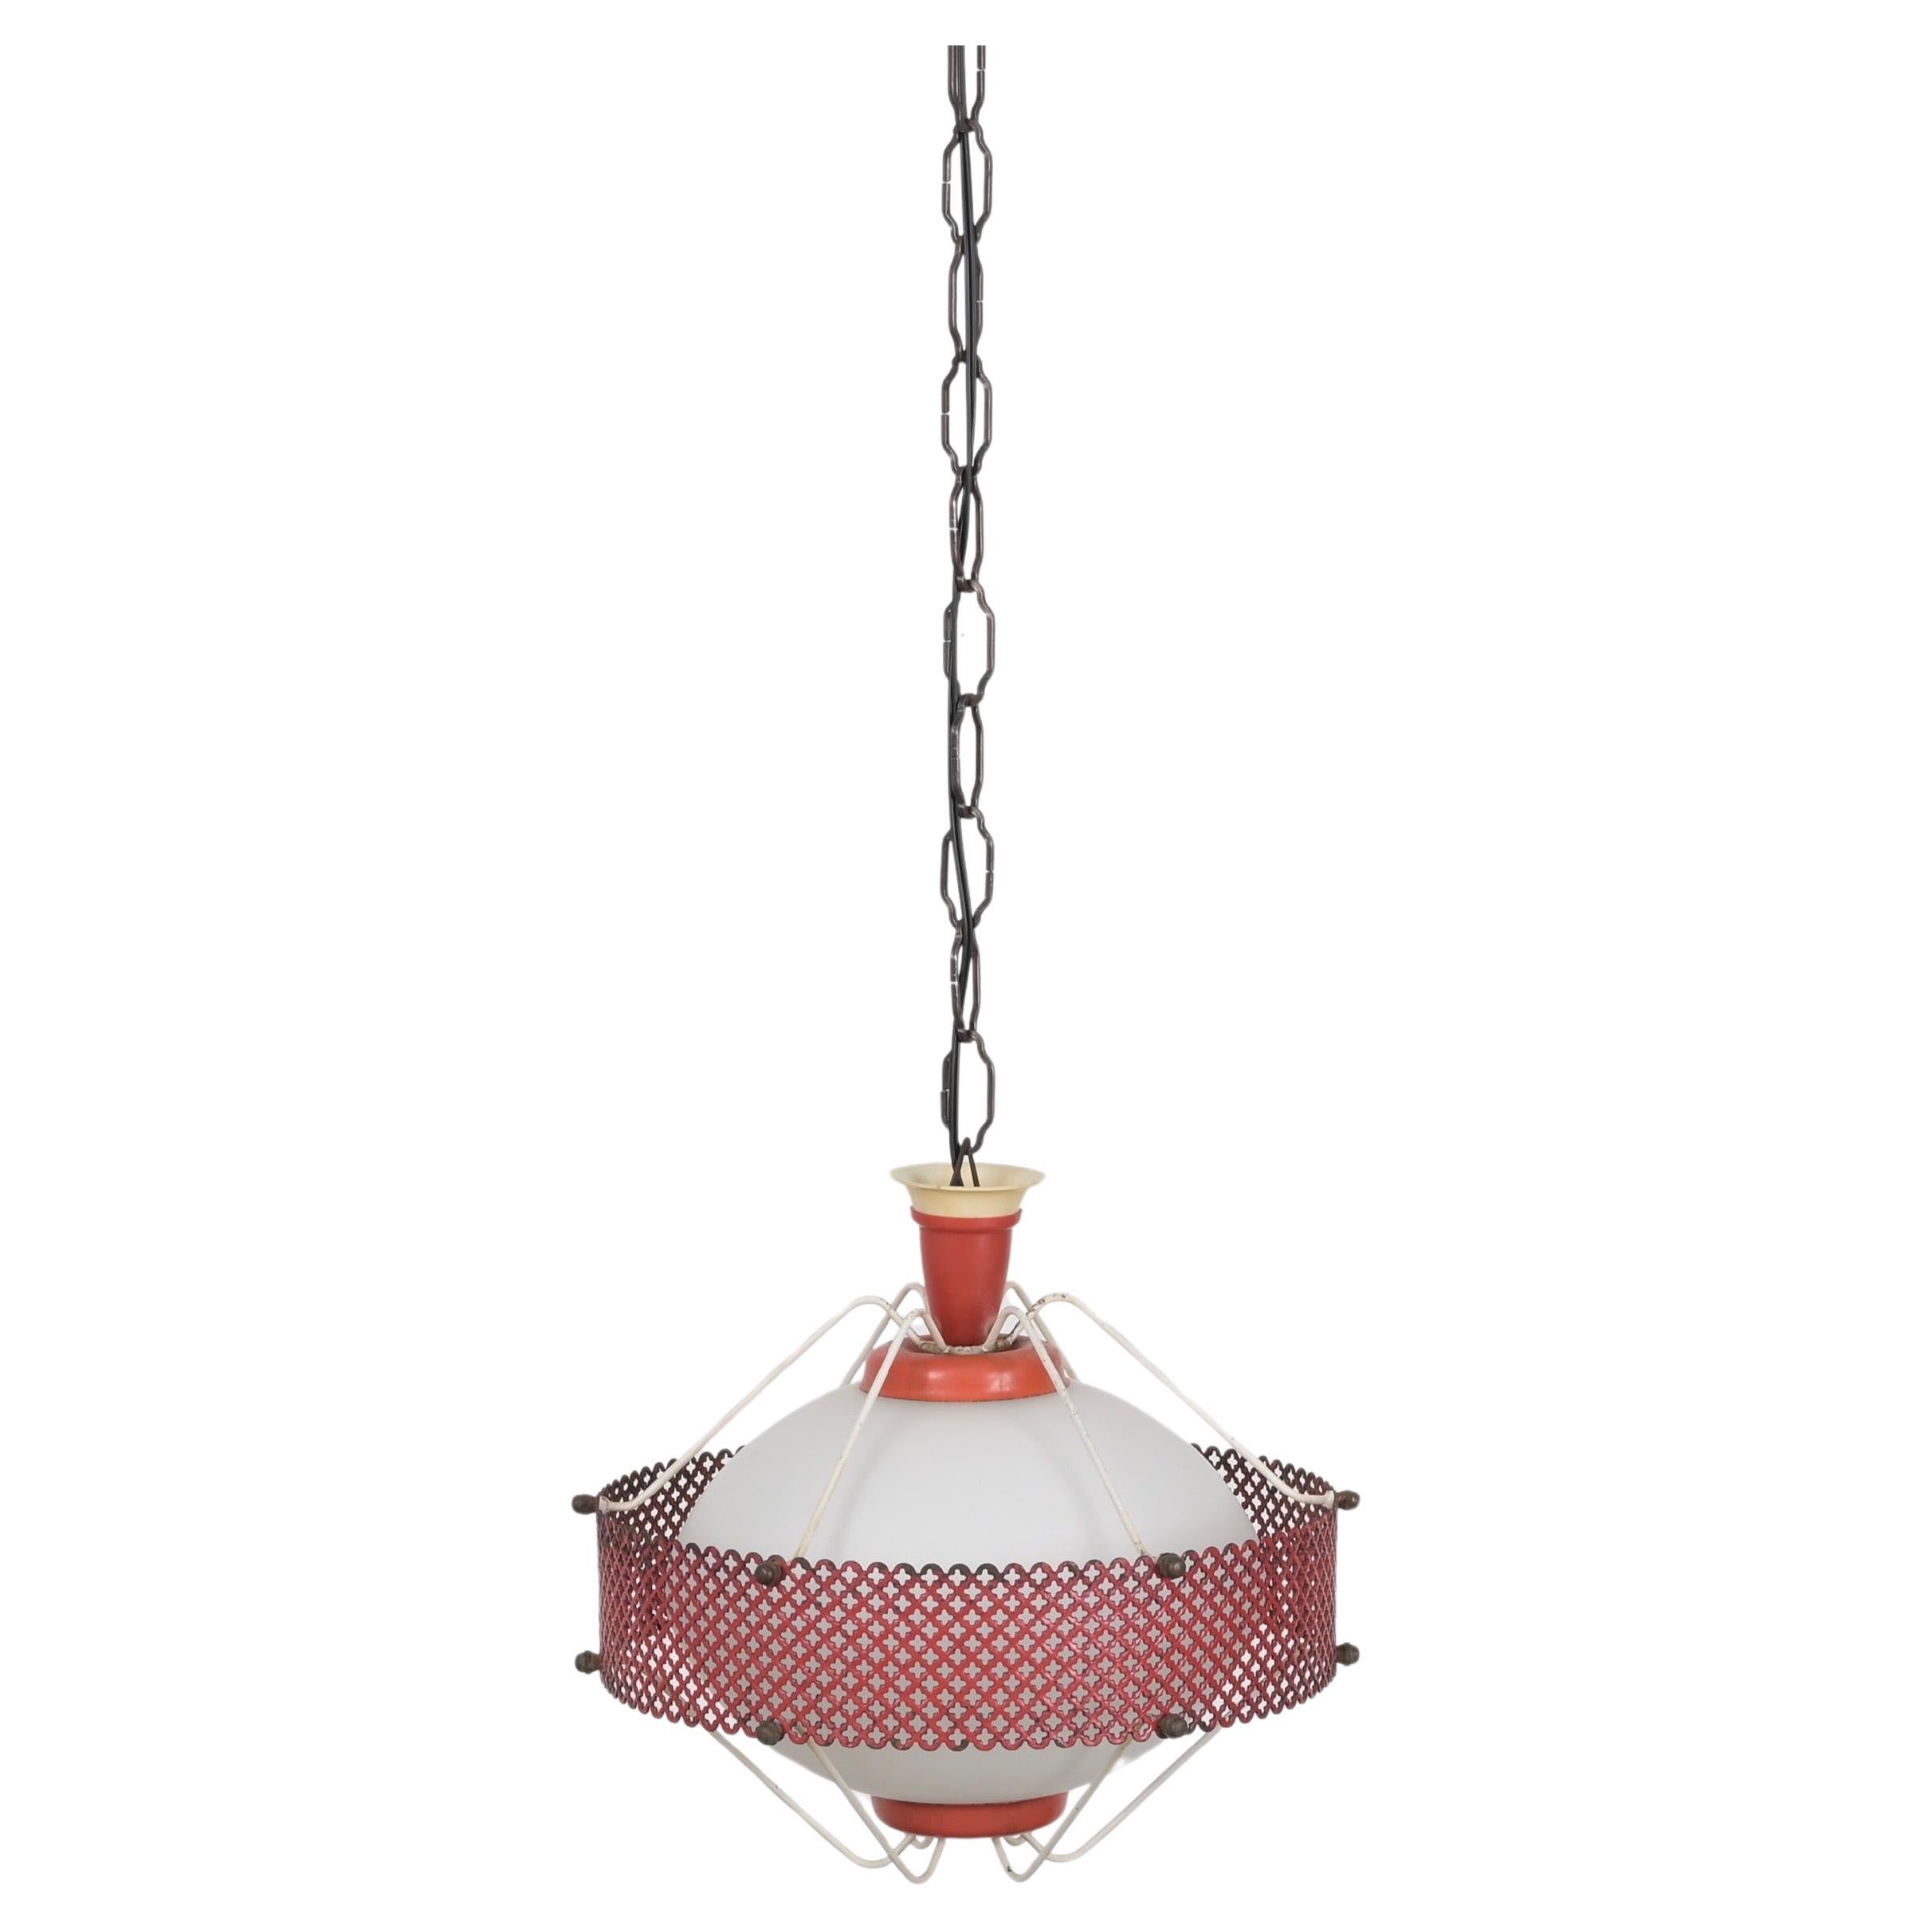 Enameled Mathieu Matégot Pendant Lamps in Opal Glass, Red Metal, 1950s French Lighting For Sale